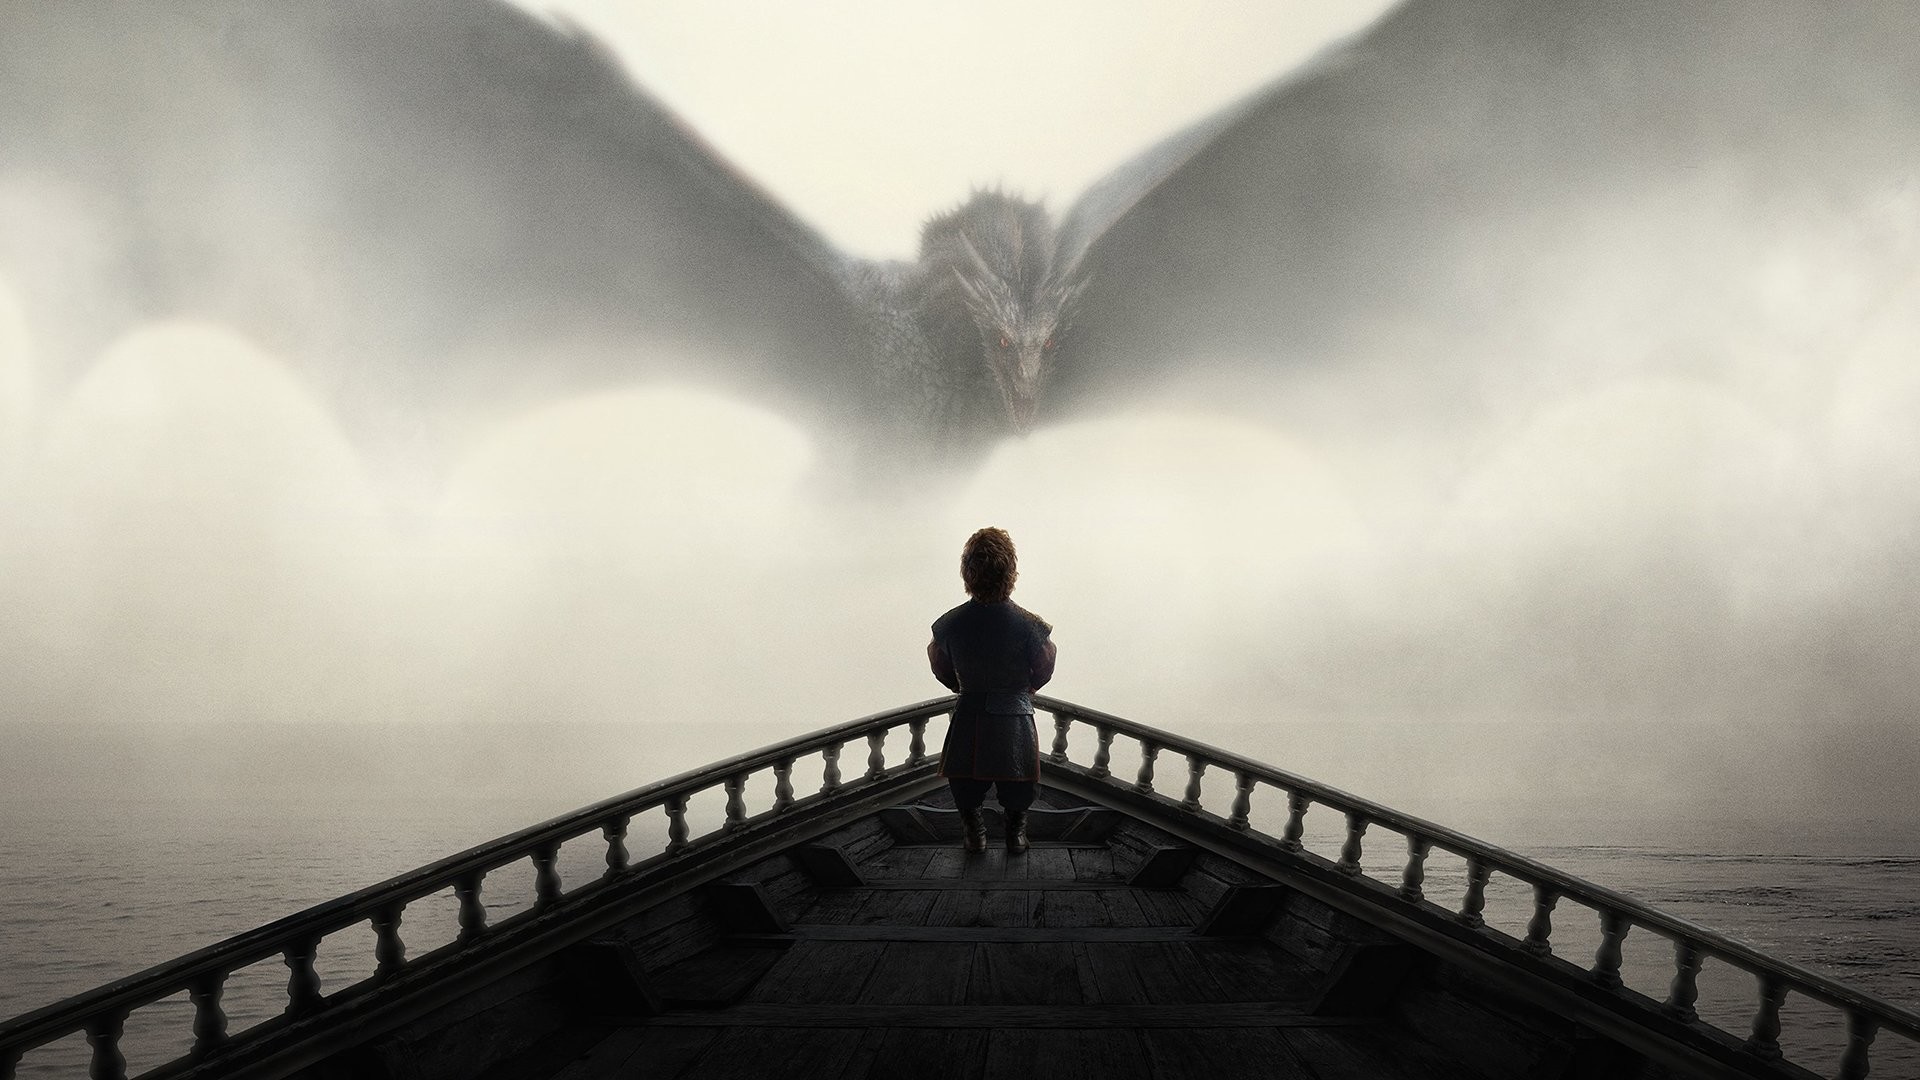 Game of Thrones Wallpaper 1080p (72+ images)